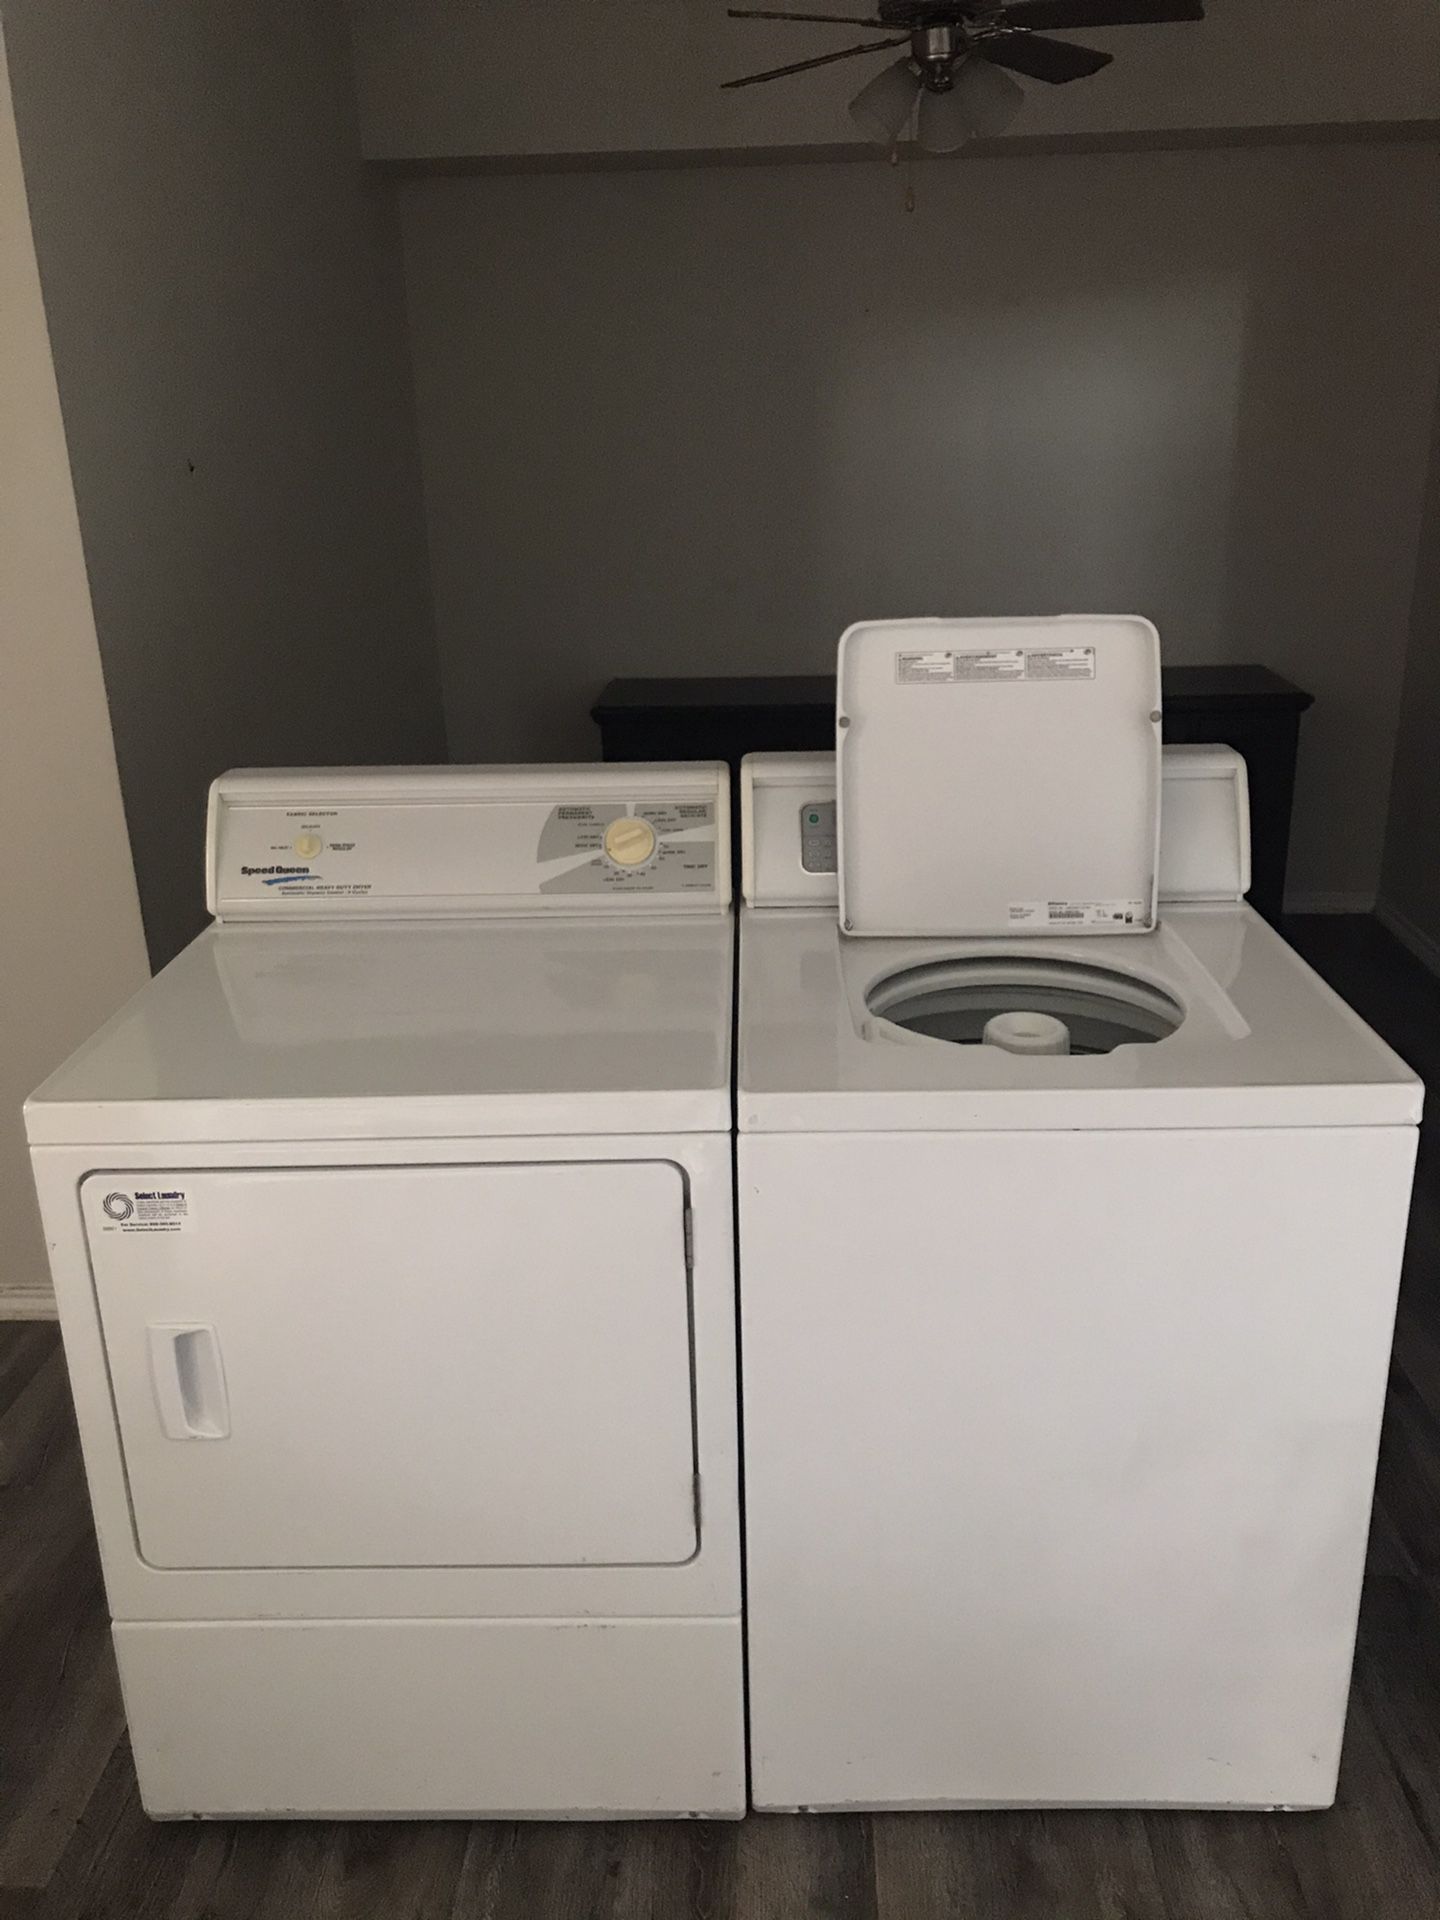 Washer and dryer. Brand “Speed queen”